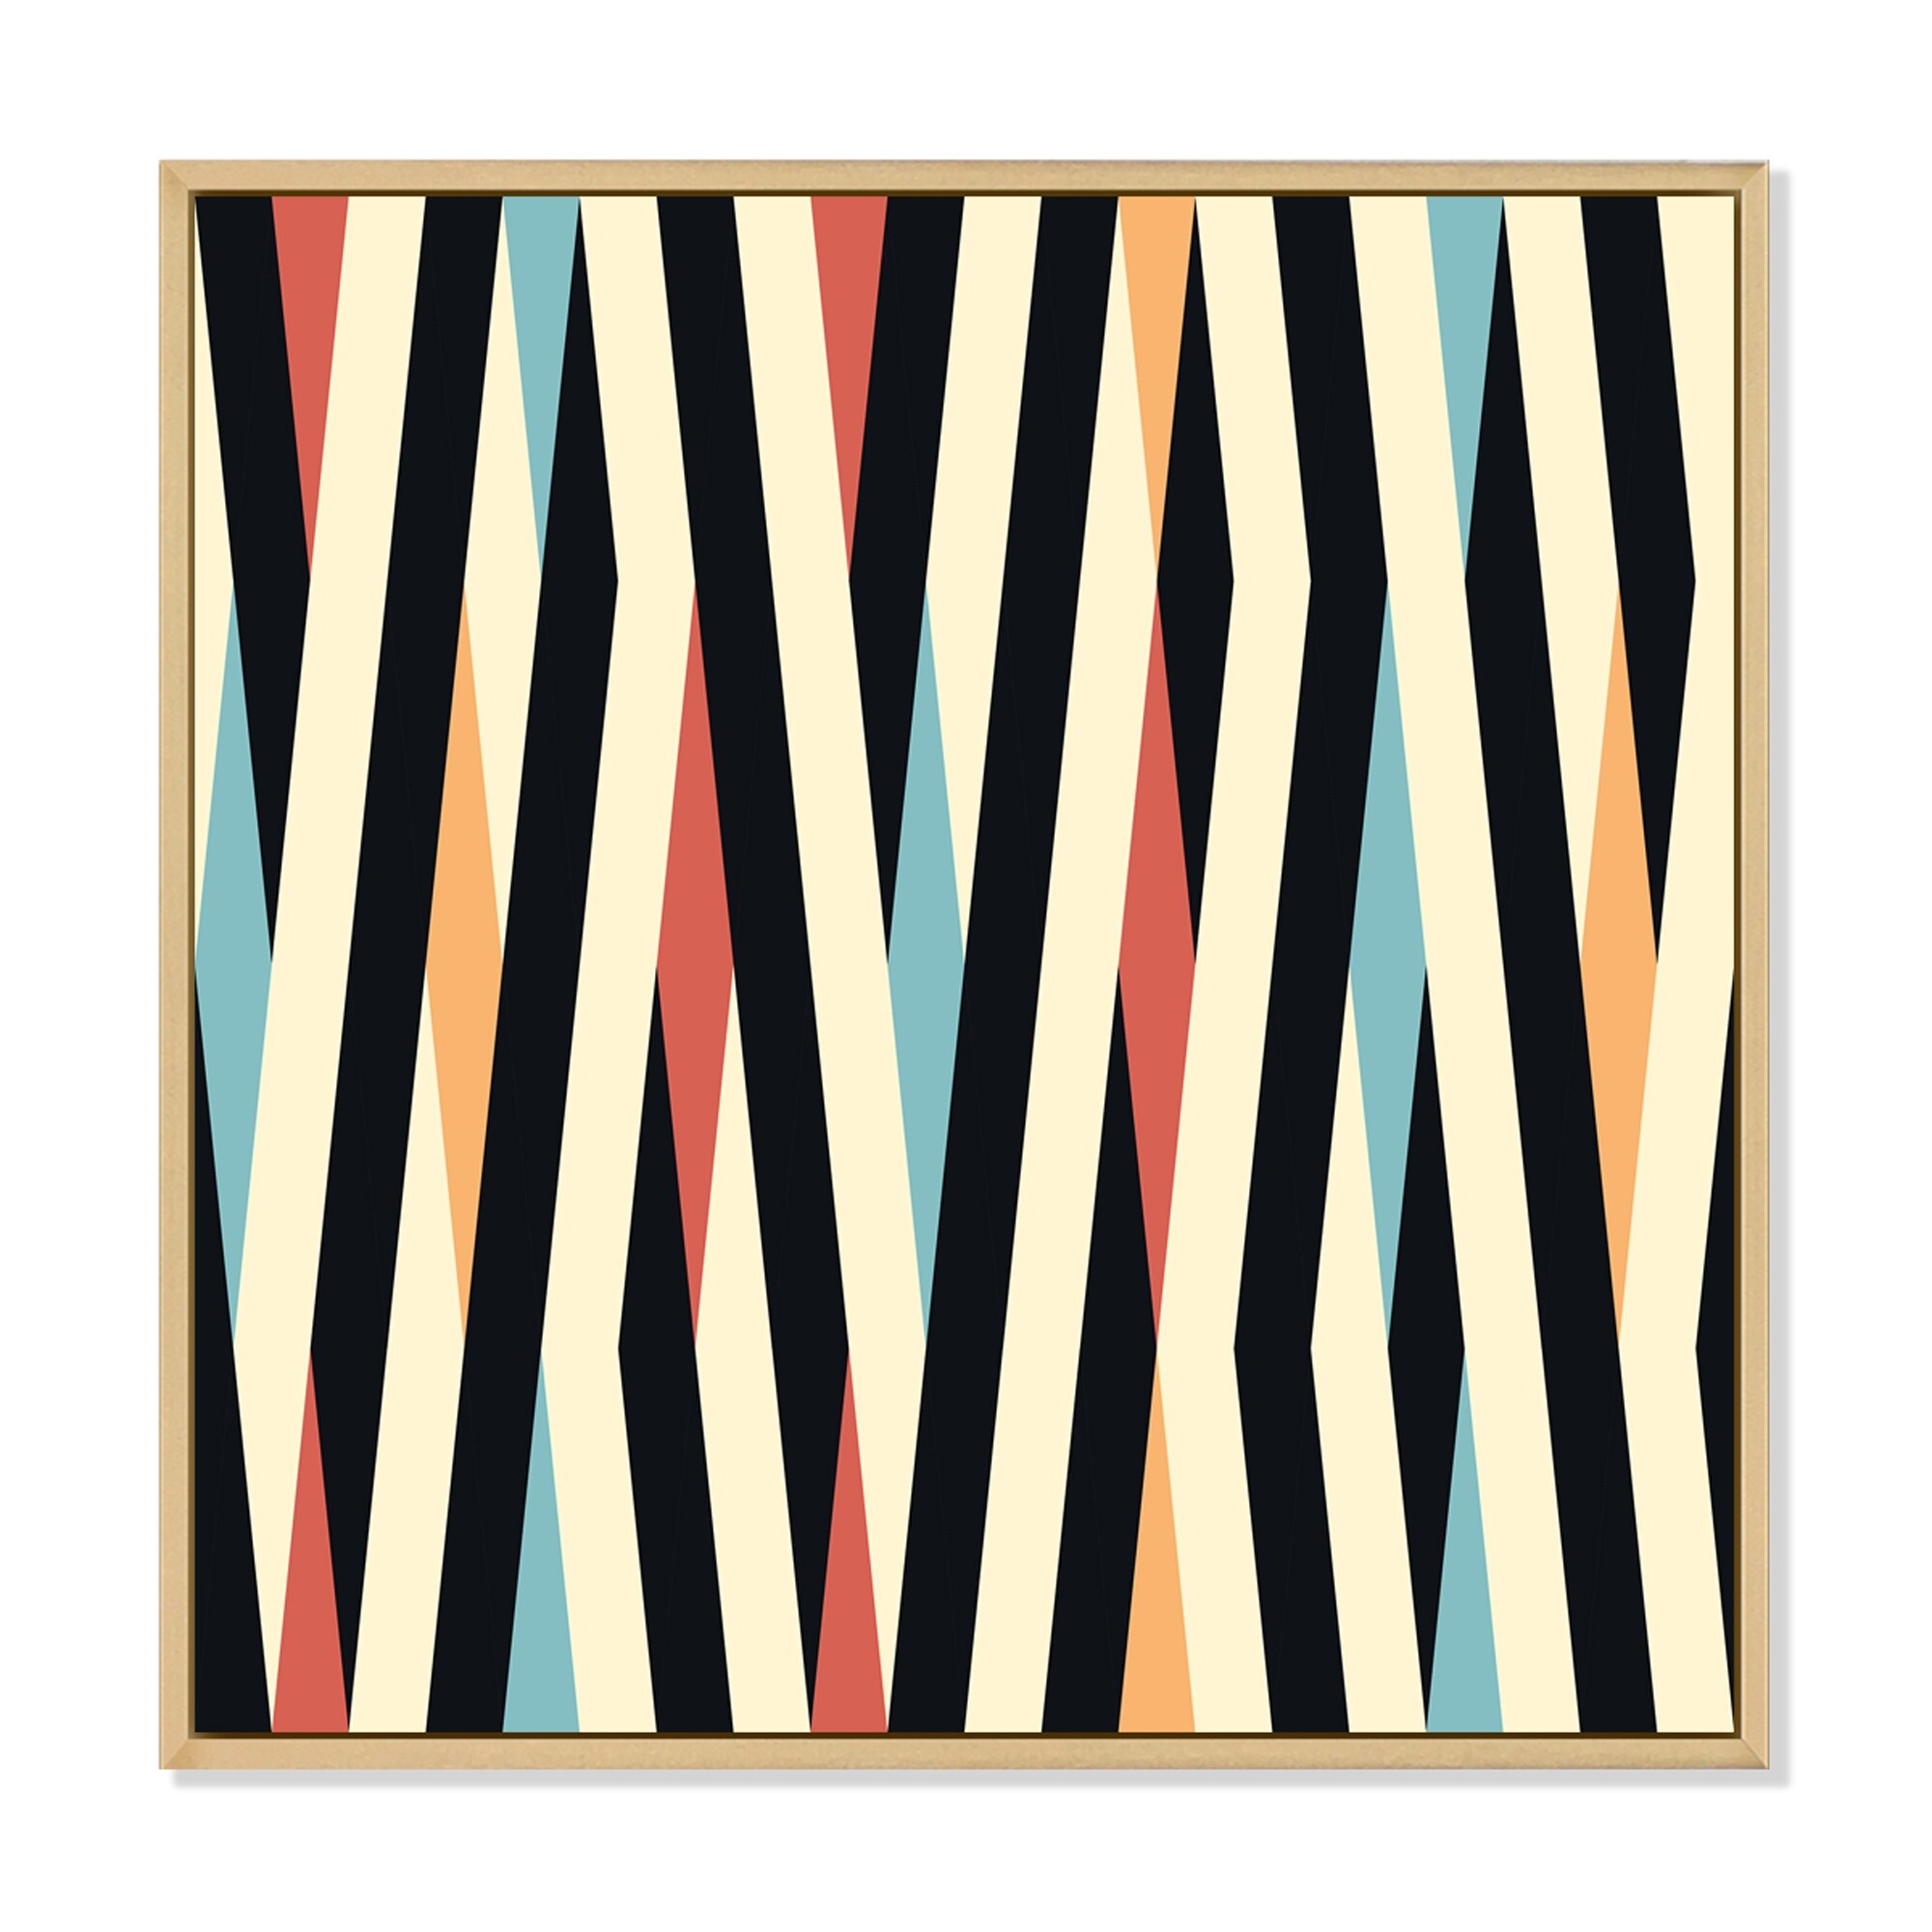 Designart "Retro Black And Beige Stripes In Blue Red, Yellow" Patterned Framed Canvas Wall Art Print